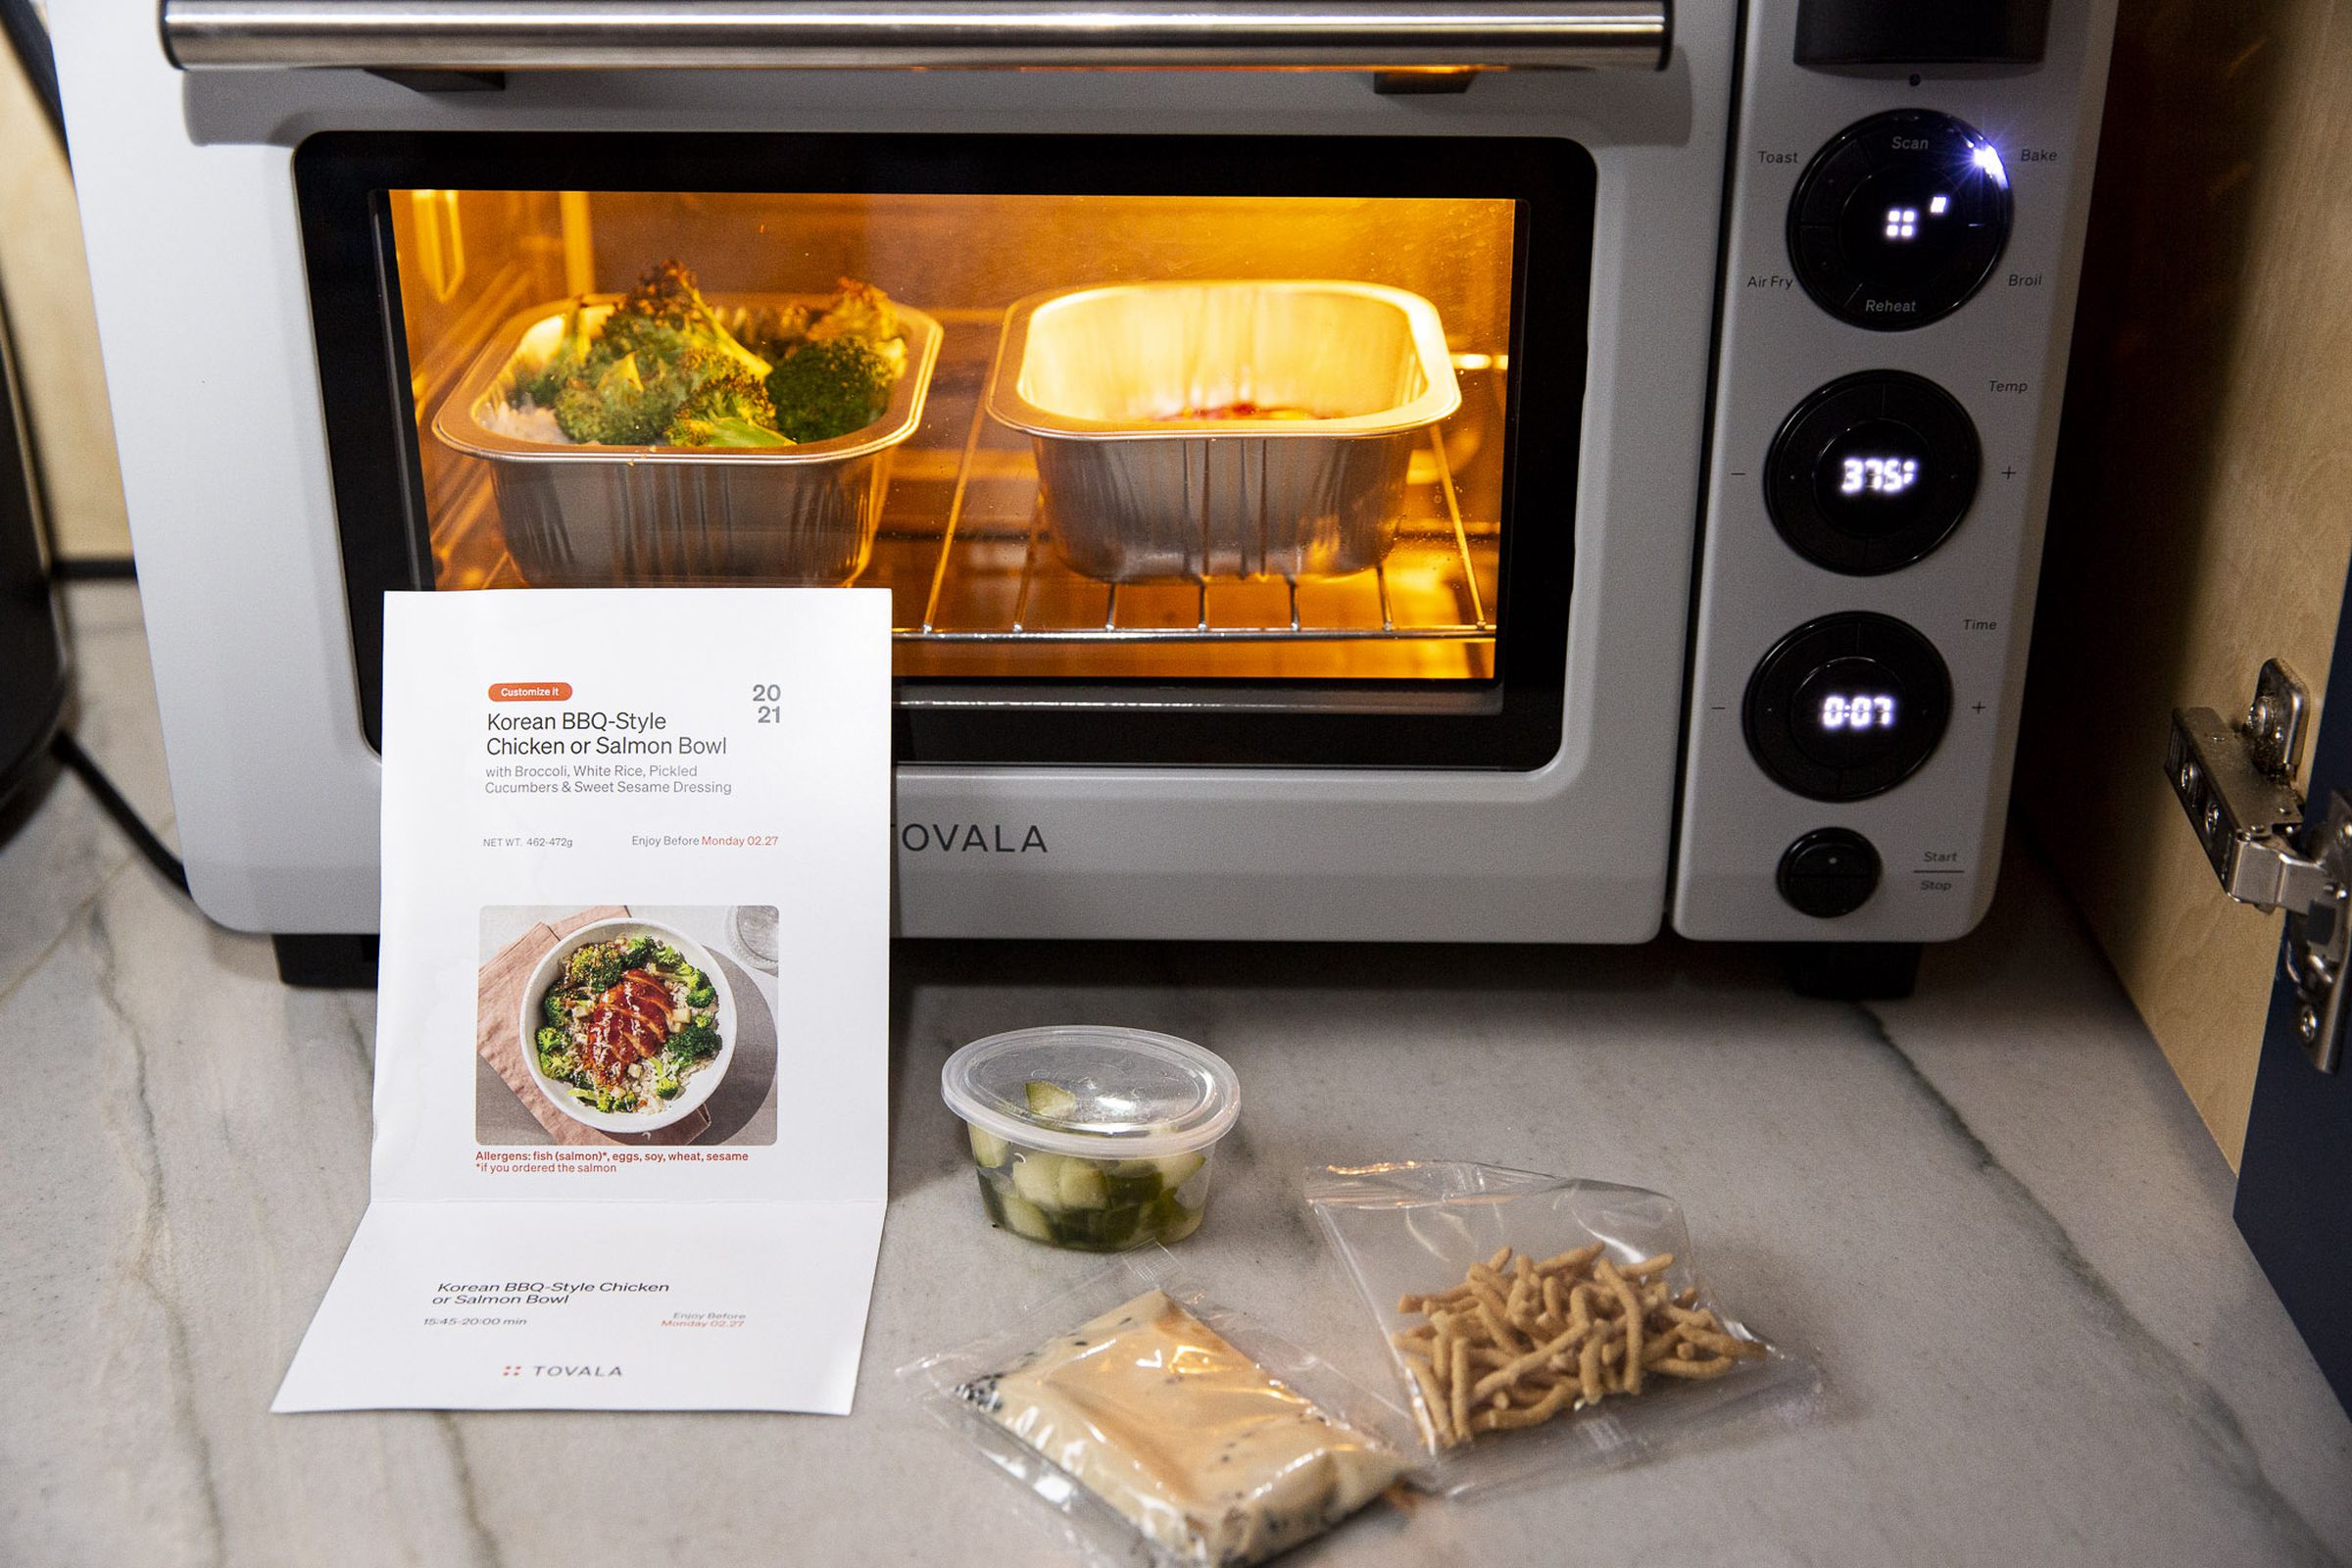 You cook all the parts of the Tovala meal kit at the same time by just scanning a QR code and pressing start.